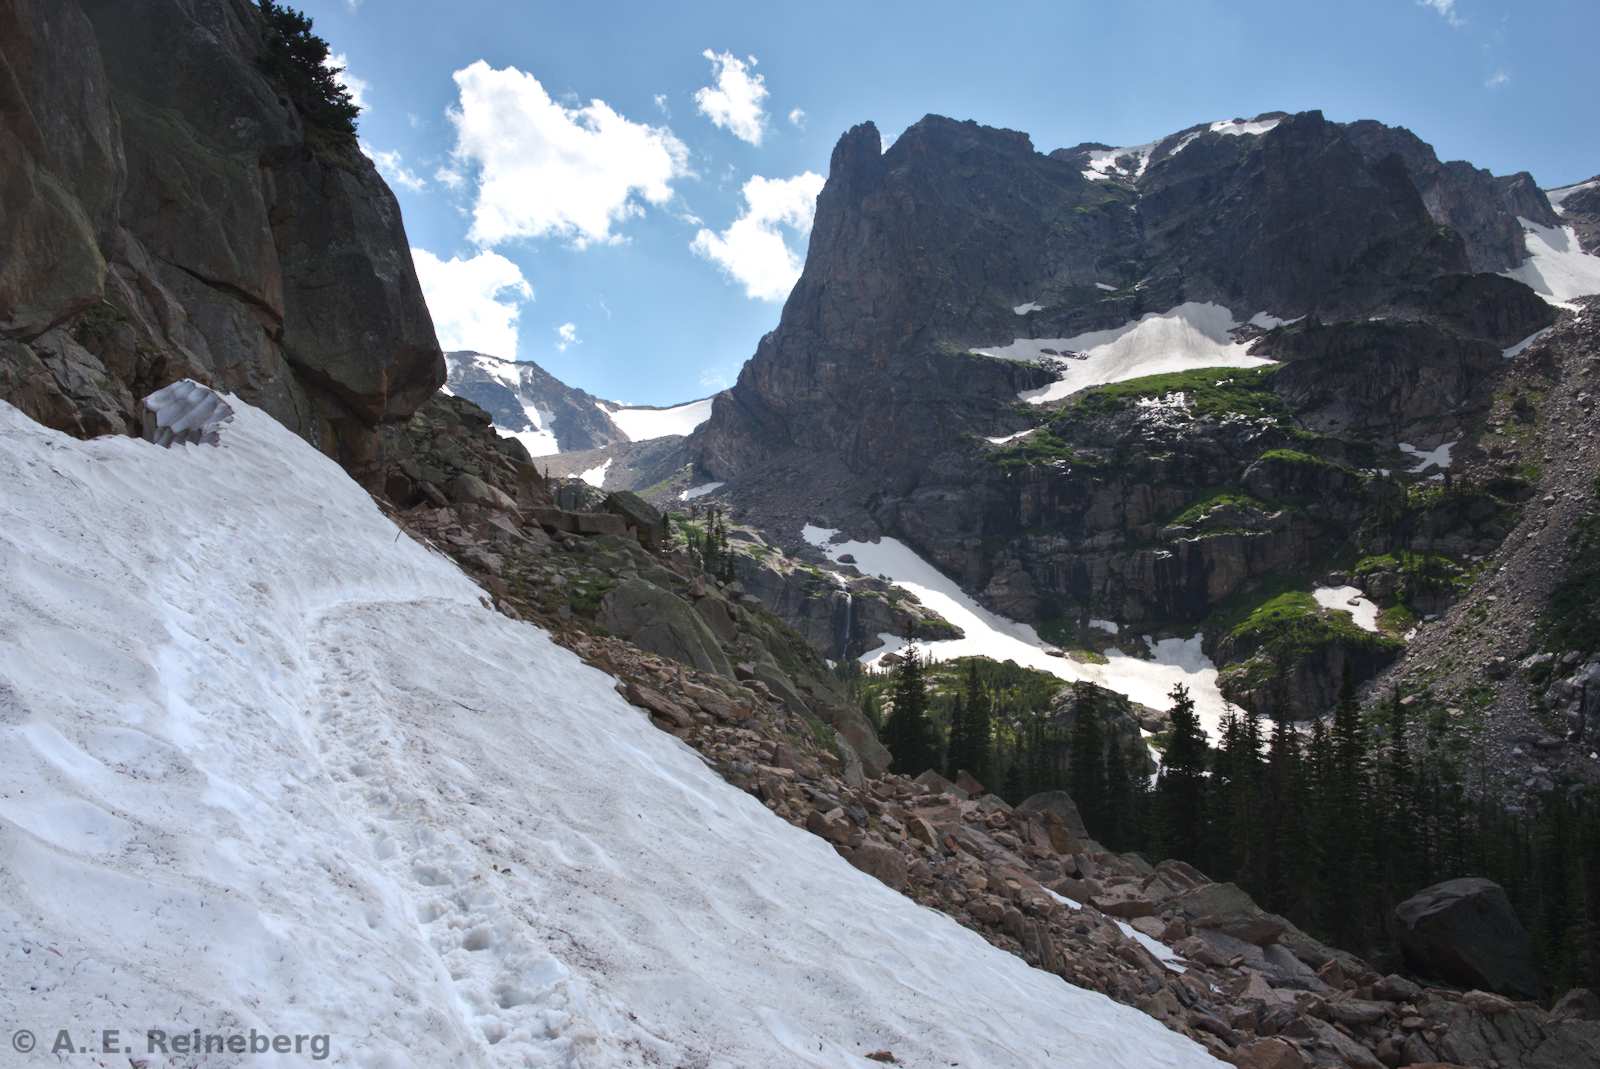 Summer hiking in Rocky Mountain National Park